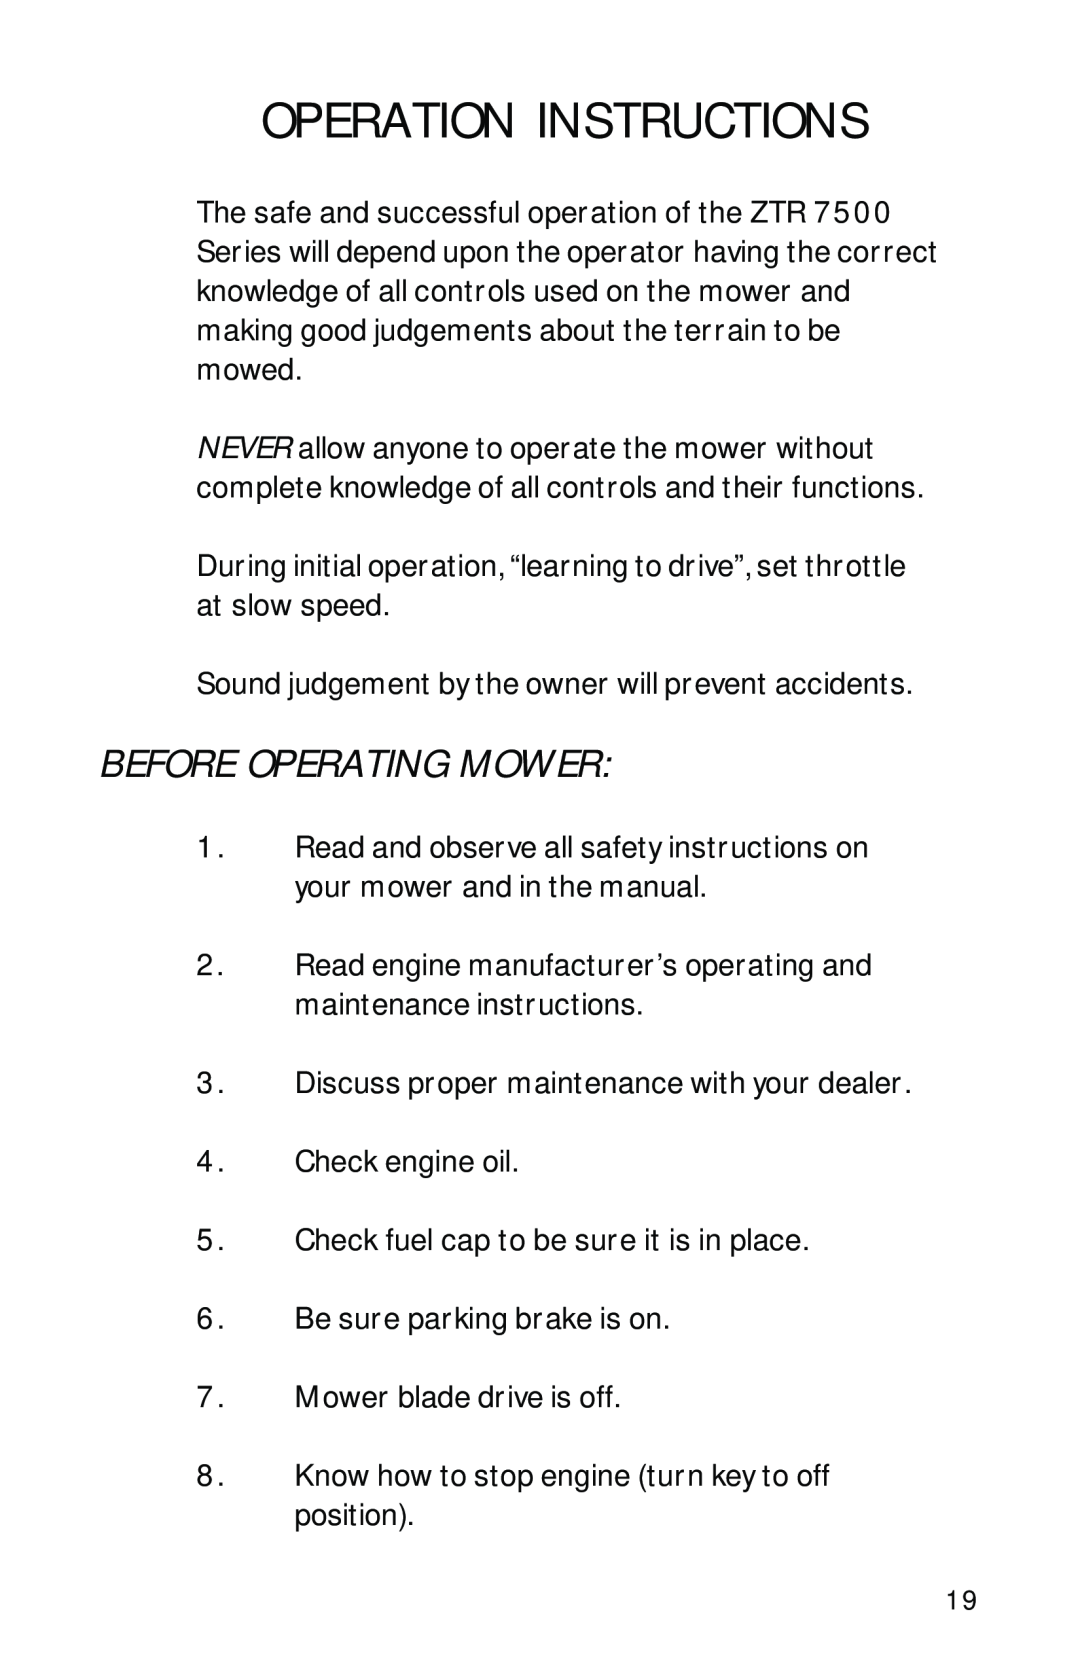 Dixon 7500 Series manual Operation Instructions, Before Operating Mower 